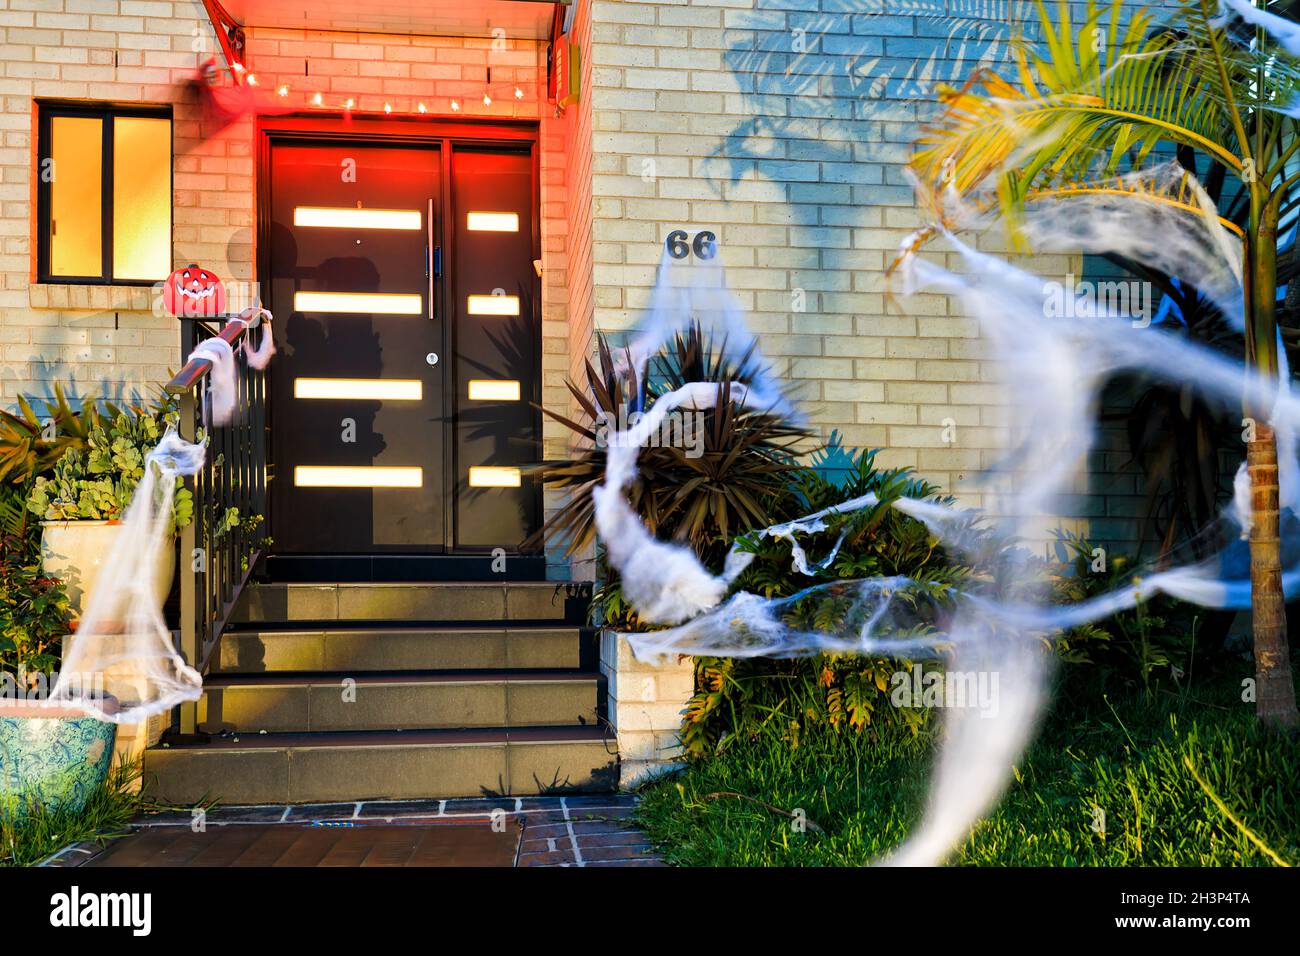 Halloween celebration and decoration of a residential house in Sydney suburb with lights and spider webs. Stock Photo